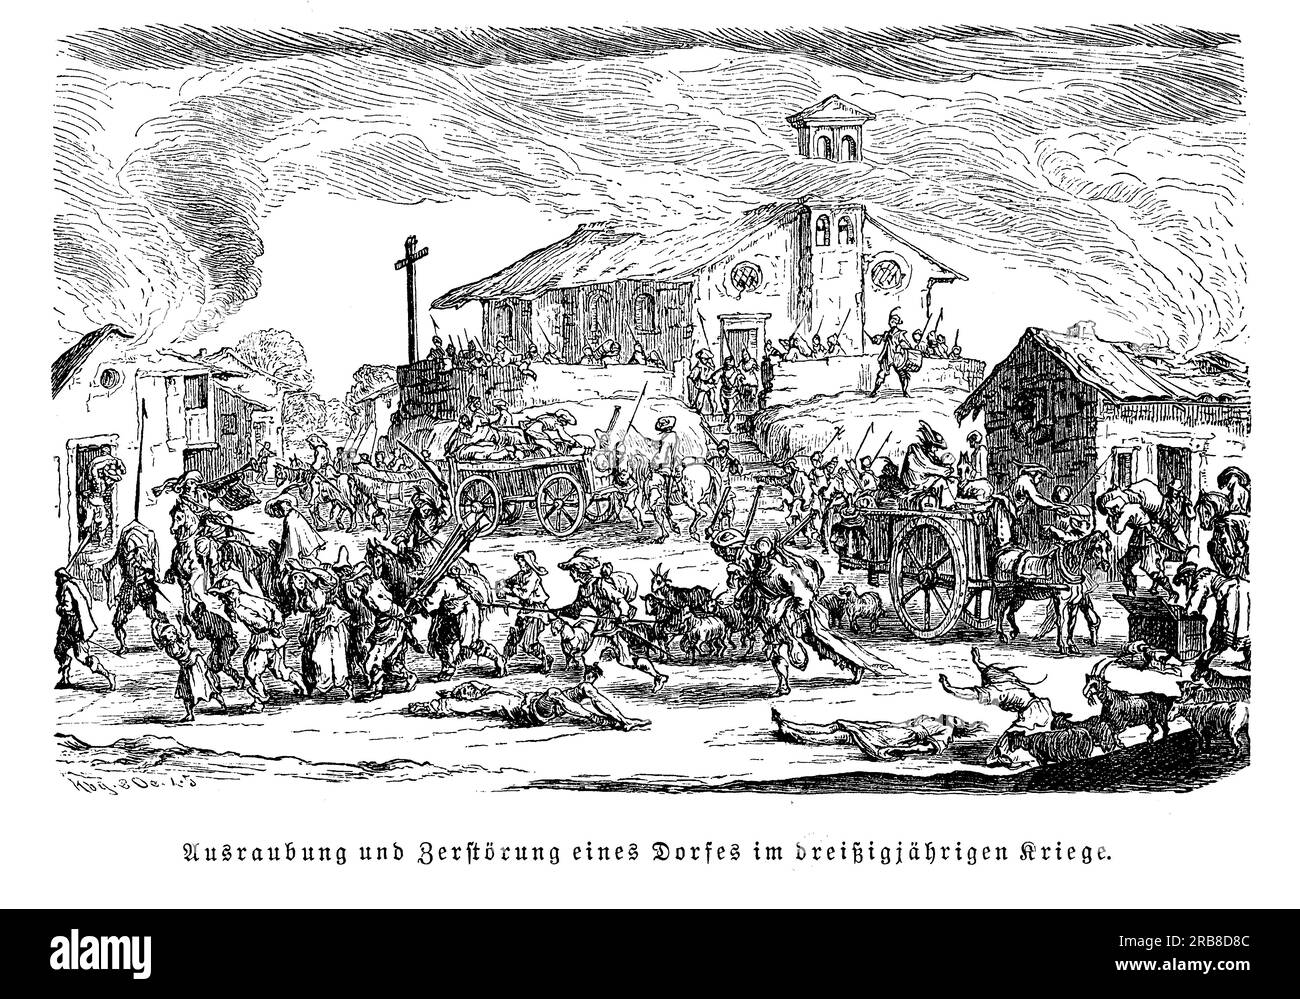 Destruction of a village in the Thirty Years' War. The Thirty Years' War was a conflict that lasted from 1618 to 1648 and involved most of the major European powers of the time. It began as a religious war between Protestants and Catholics in the Holy Roman Empire, but eventually evolved into a complex struggle for power and influence in Europe. The war was marked by a series of brutal battles, sieges, and massacres, and resulted in the deaths of millions of people. It also had a profound impact on the political and social landscape of Europe Stock Photo